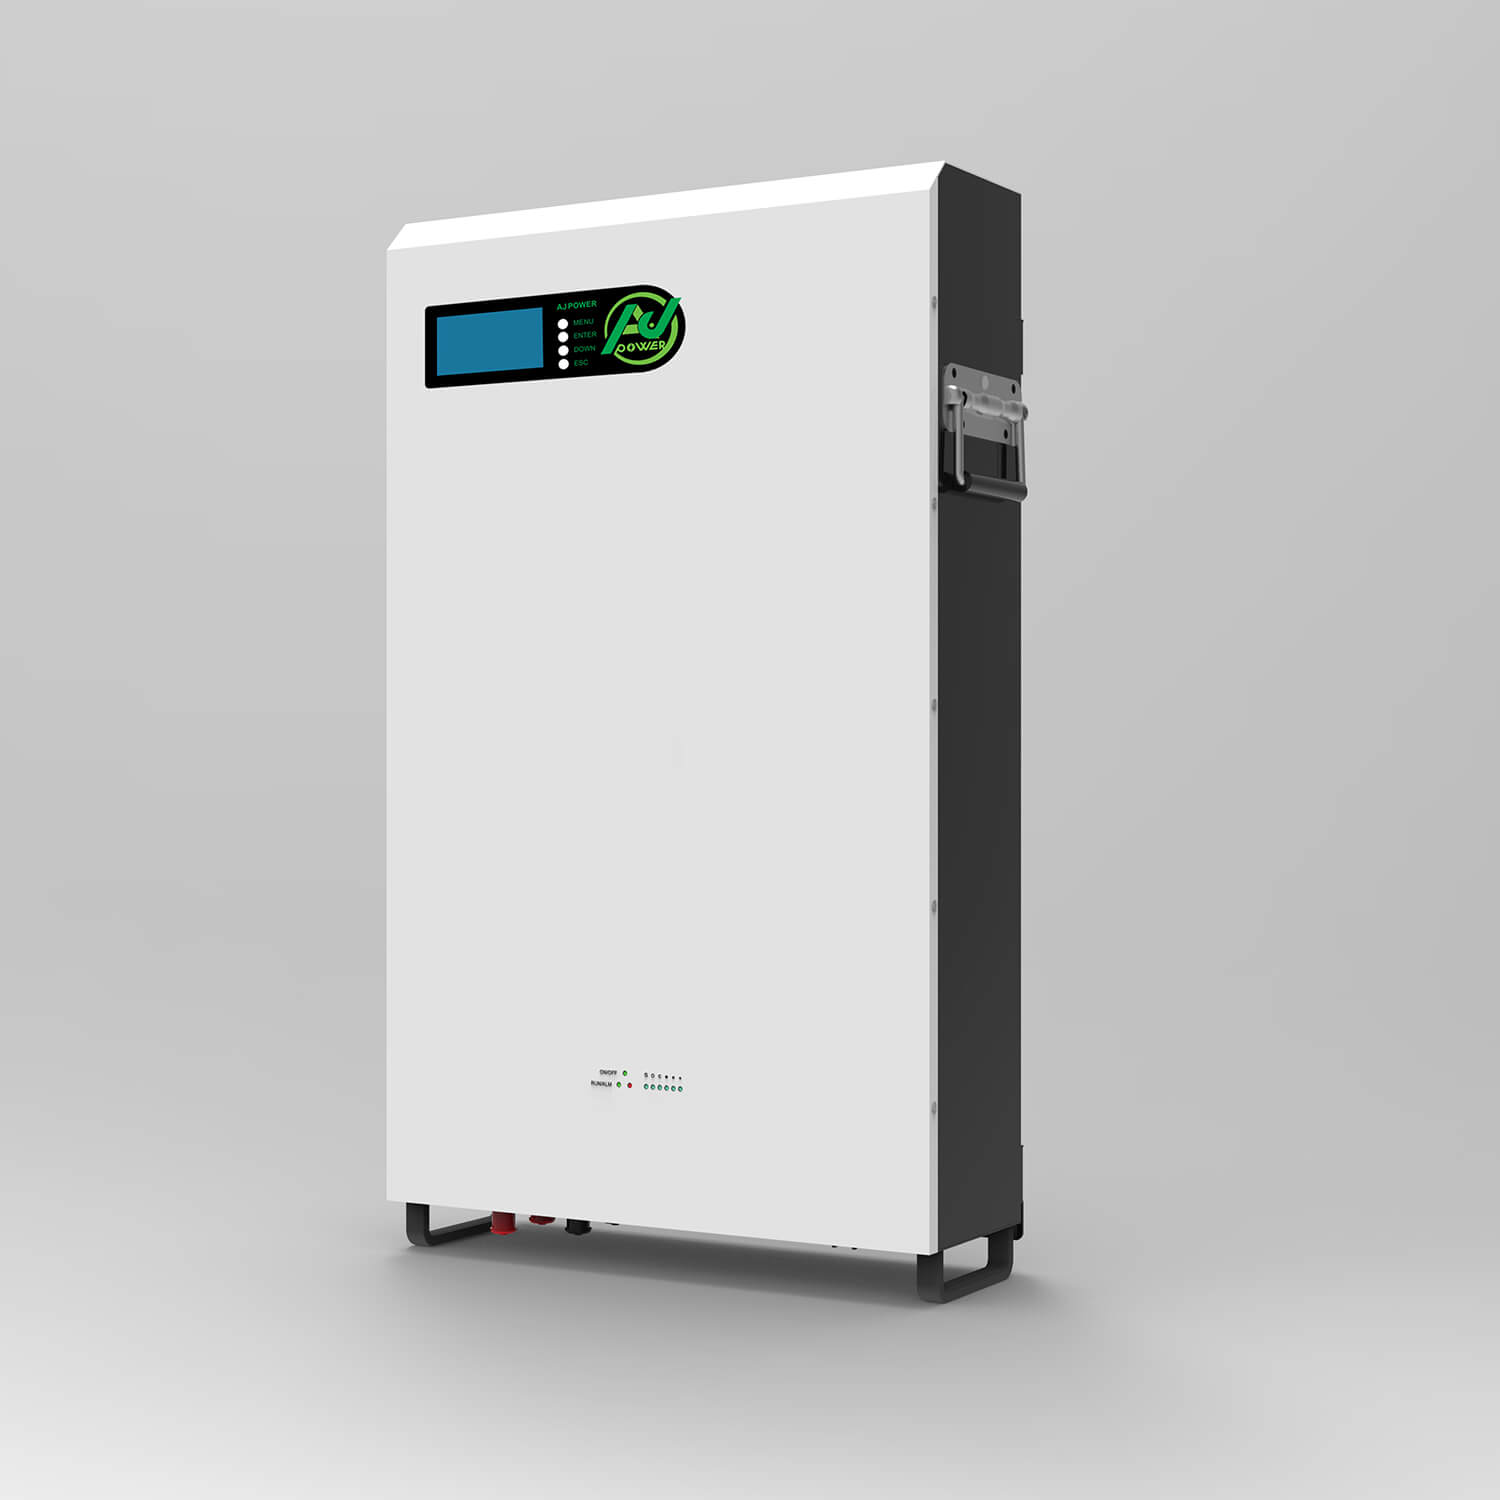 All-in-one home energy storage system